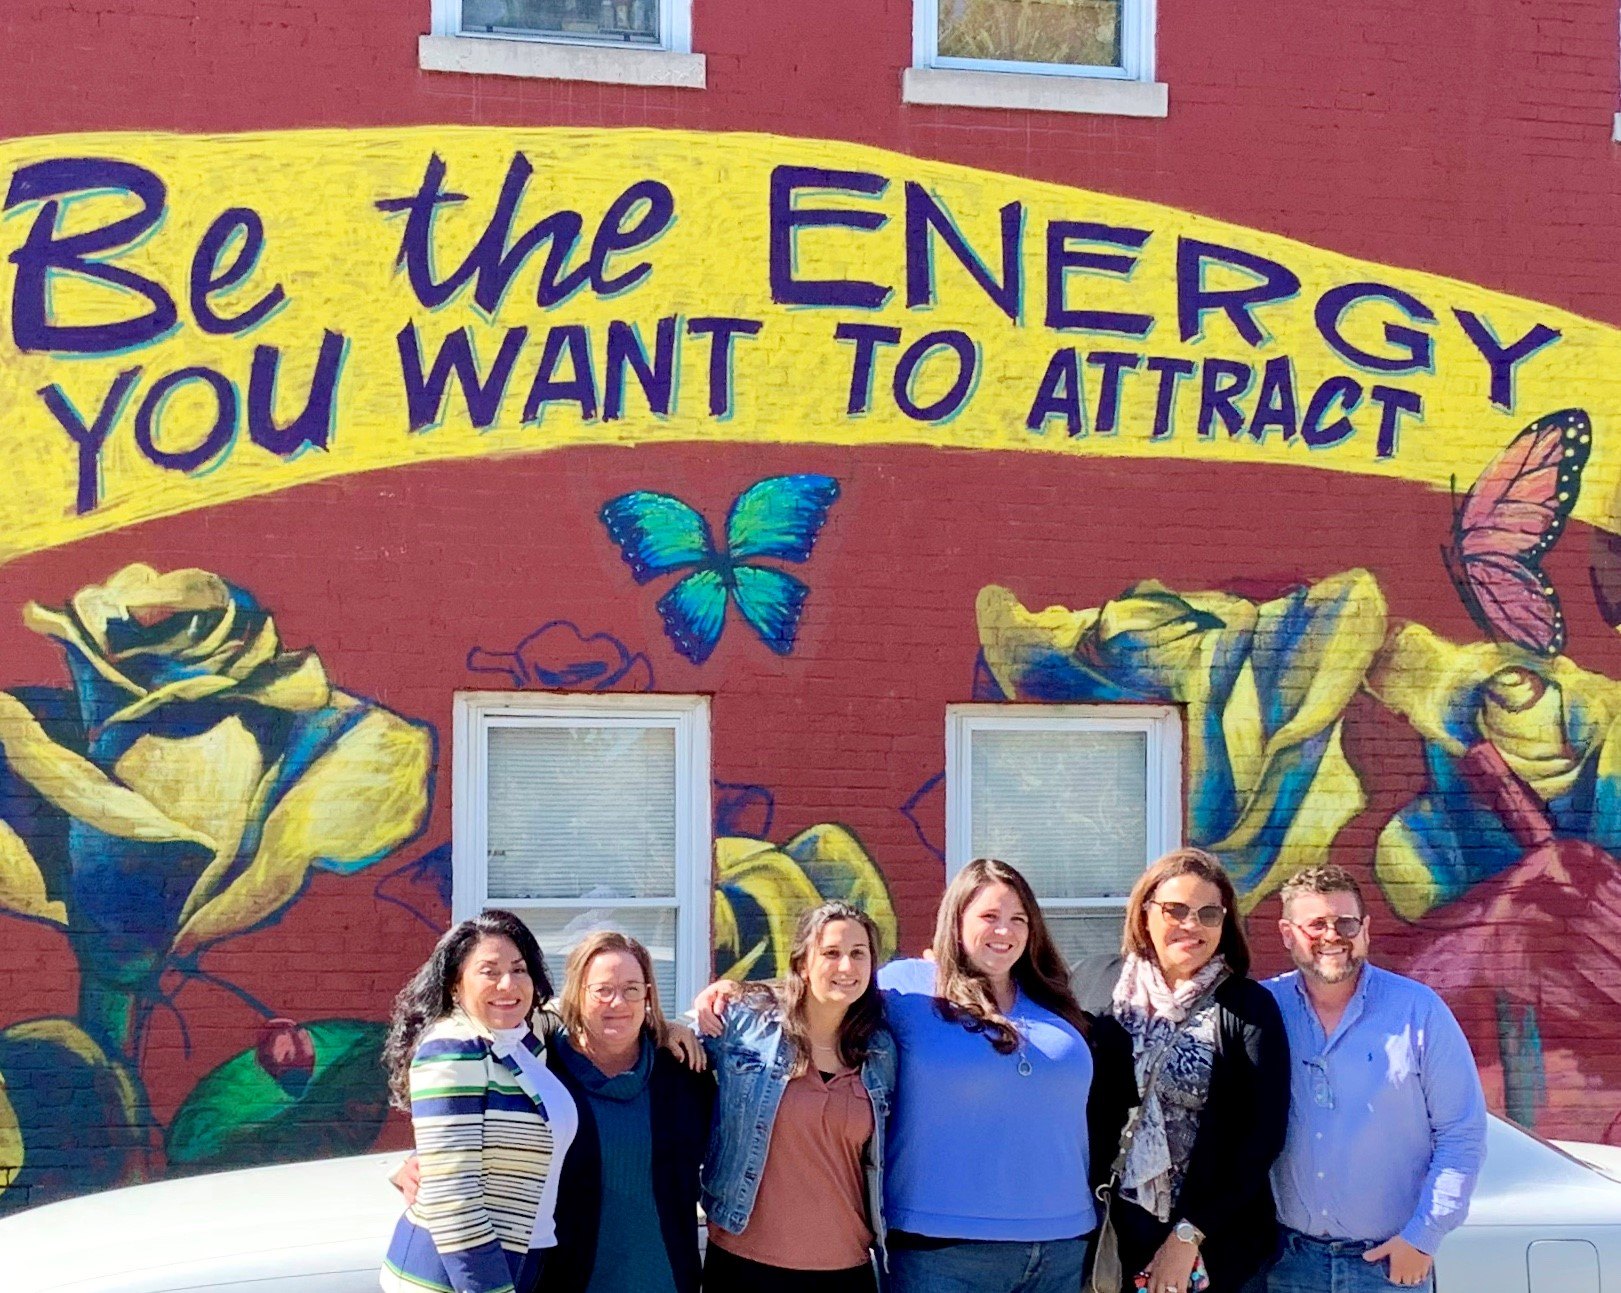 A group of six people are standing in front of a painted mural that says "Be the energy you want to attract". There are roses and butterflies on the mural.